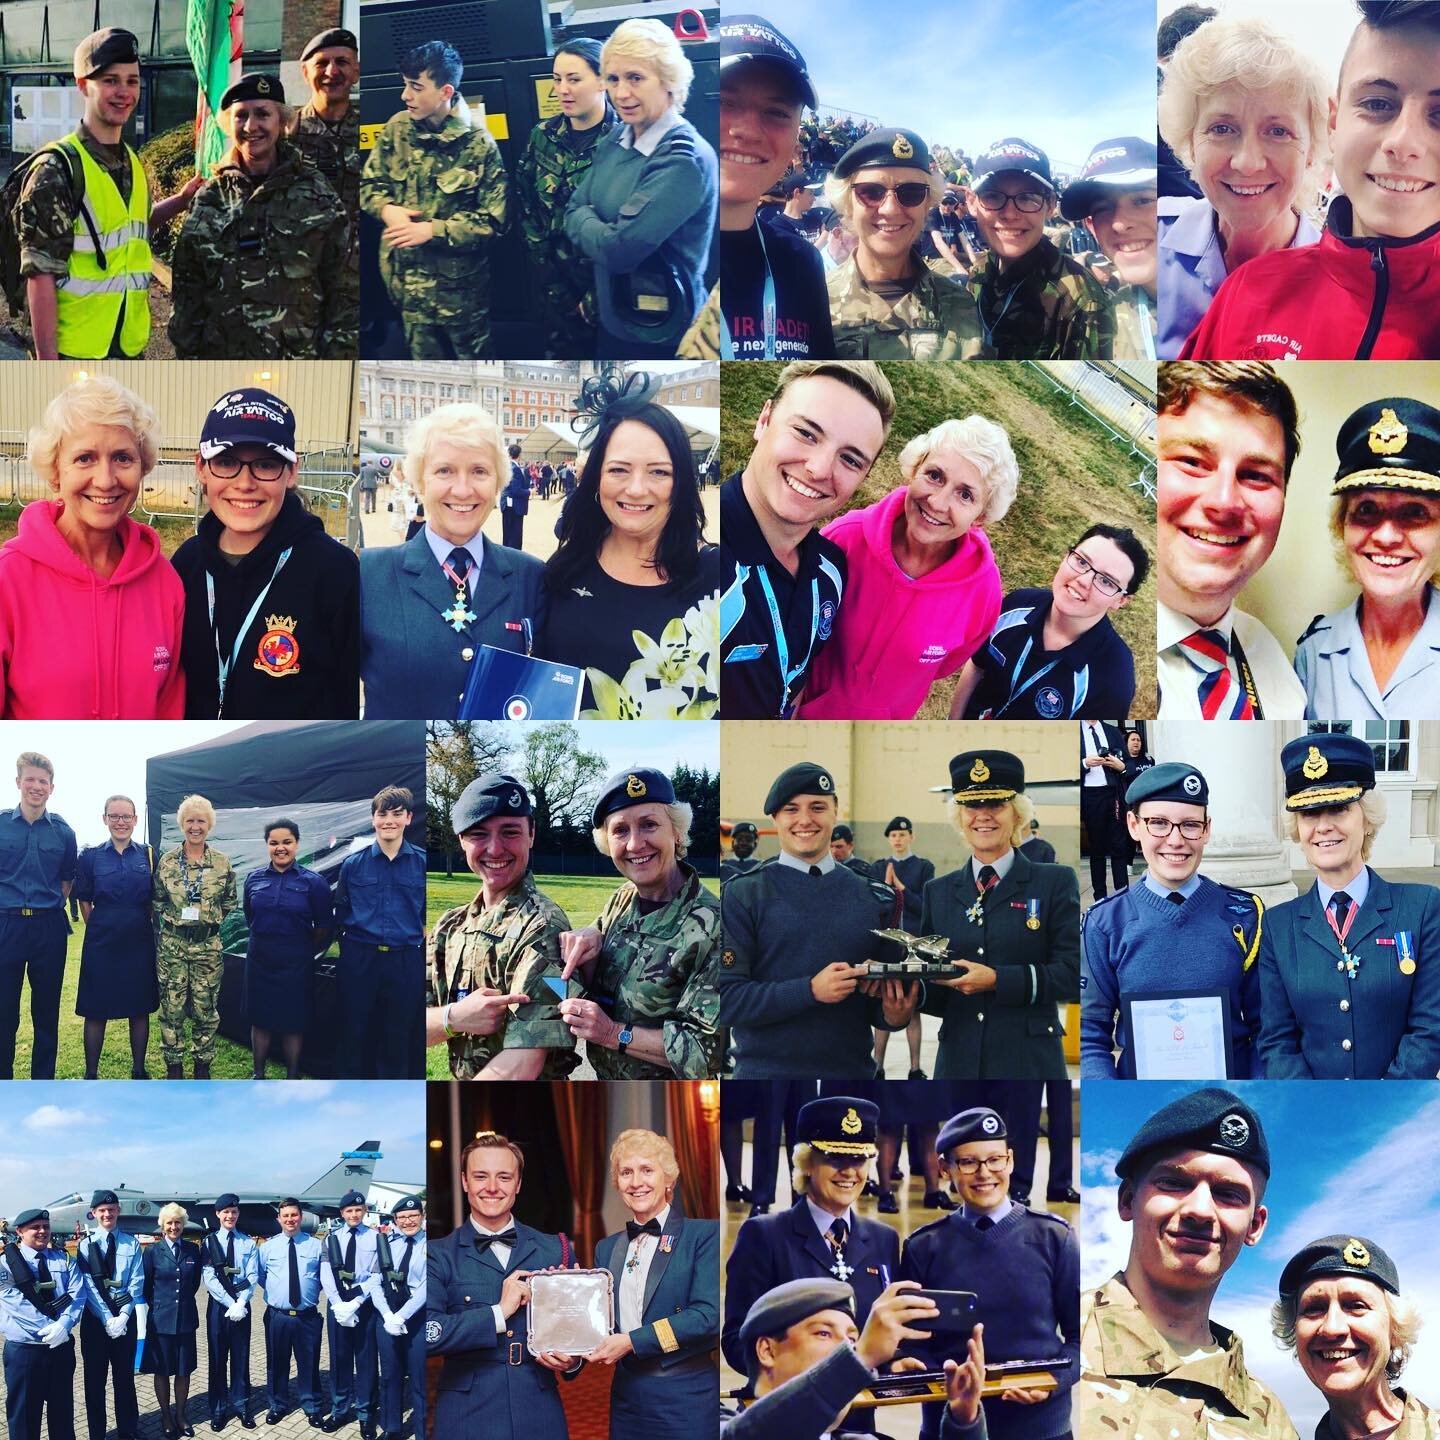 Today saw Air Cdre Dawn McCafferty&rsquo;s final day in post as Commandant Air Cadets after eight years in command of the RAF Air Cadets. 🍾

As these pictures show - just some of those collected by our cadets and staff over the years - Air Cdre McCa